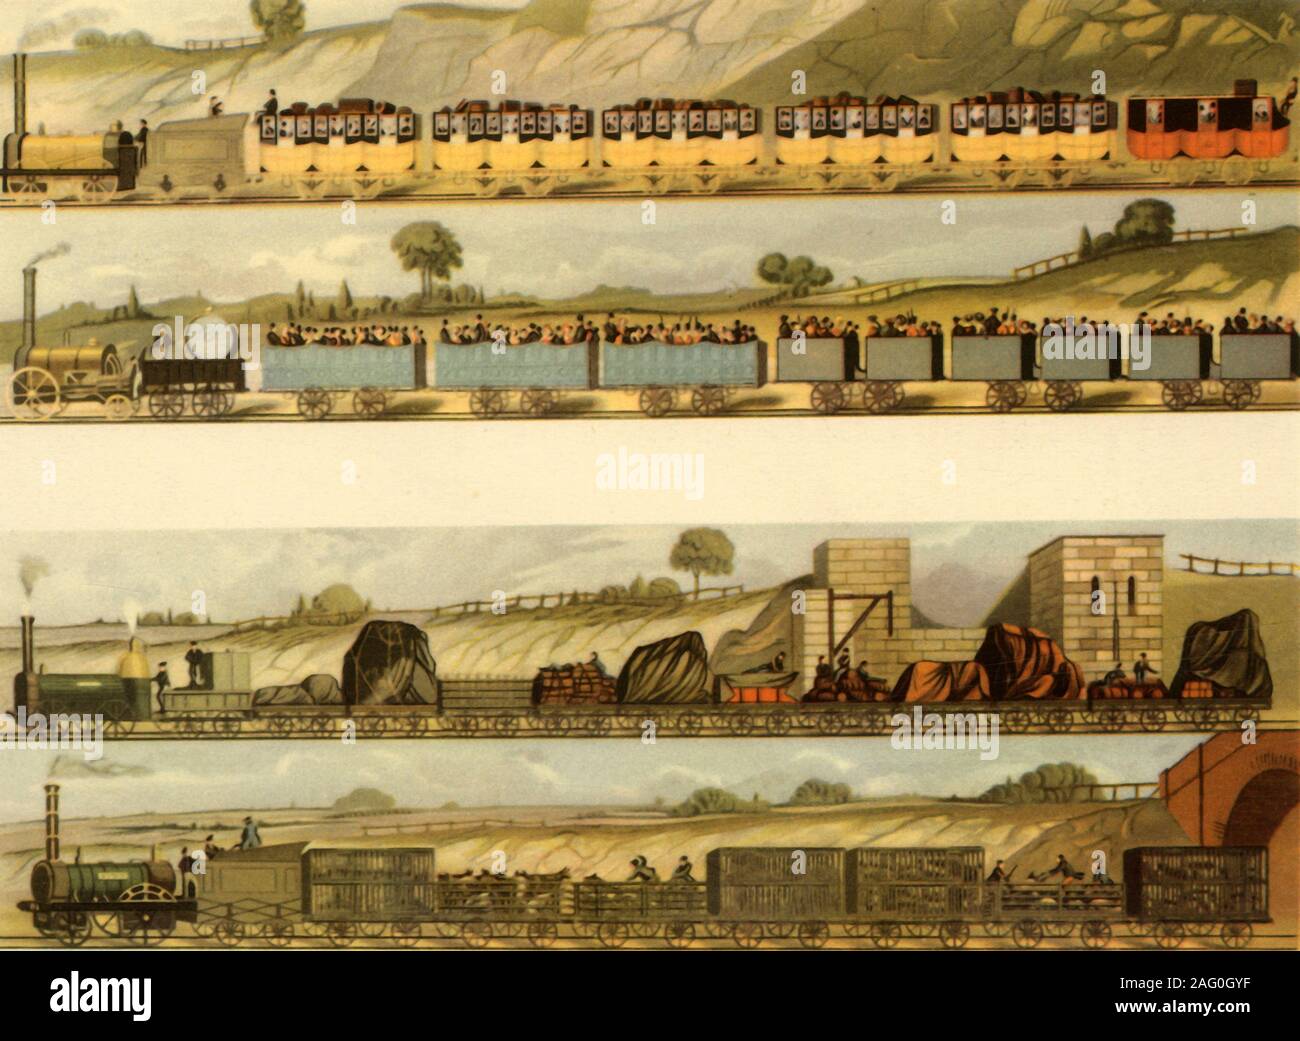 'Travelling on the Liverpool and Machester Railway', 1831, (1945). Steam locomotives on the Liverpool &amp; Manchester Railway (L&amp;MR), which first opened in 1830 under the supervision of its chief engineer, George Stephenson. The first train is the locomotive 'Jupiter' hauling first class covered carriages and a mail coach. Below, the locomotive 'North Star' hauls open-topped second class carriages. From &quot;British Railways&quot;, by Arthur Elton. [Collins, London, 1945] Stock Photo